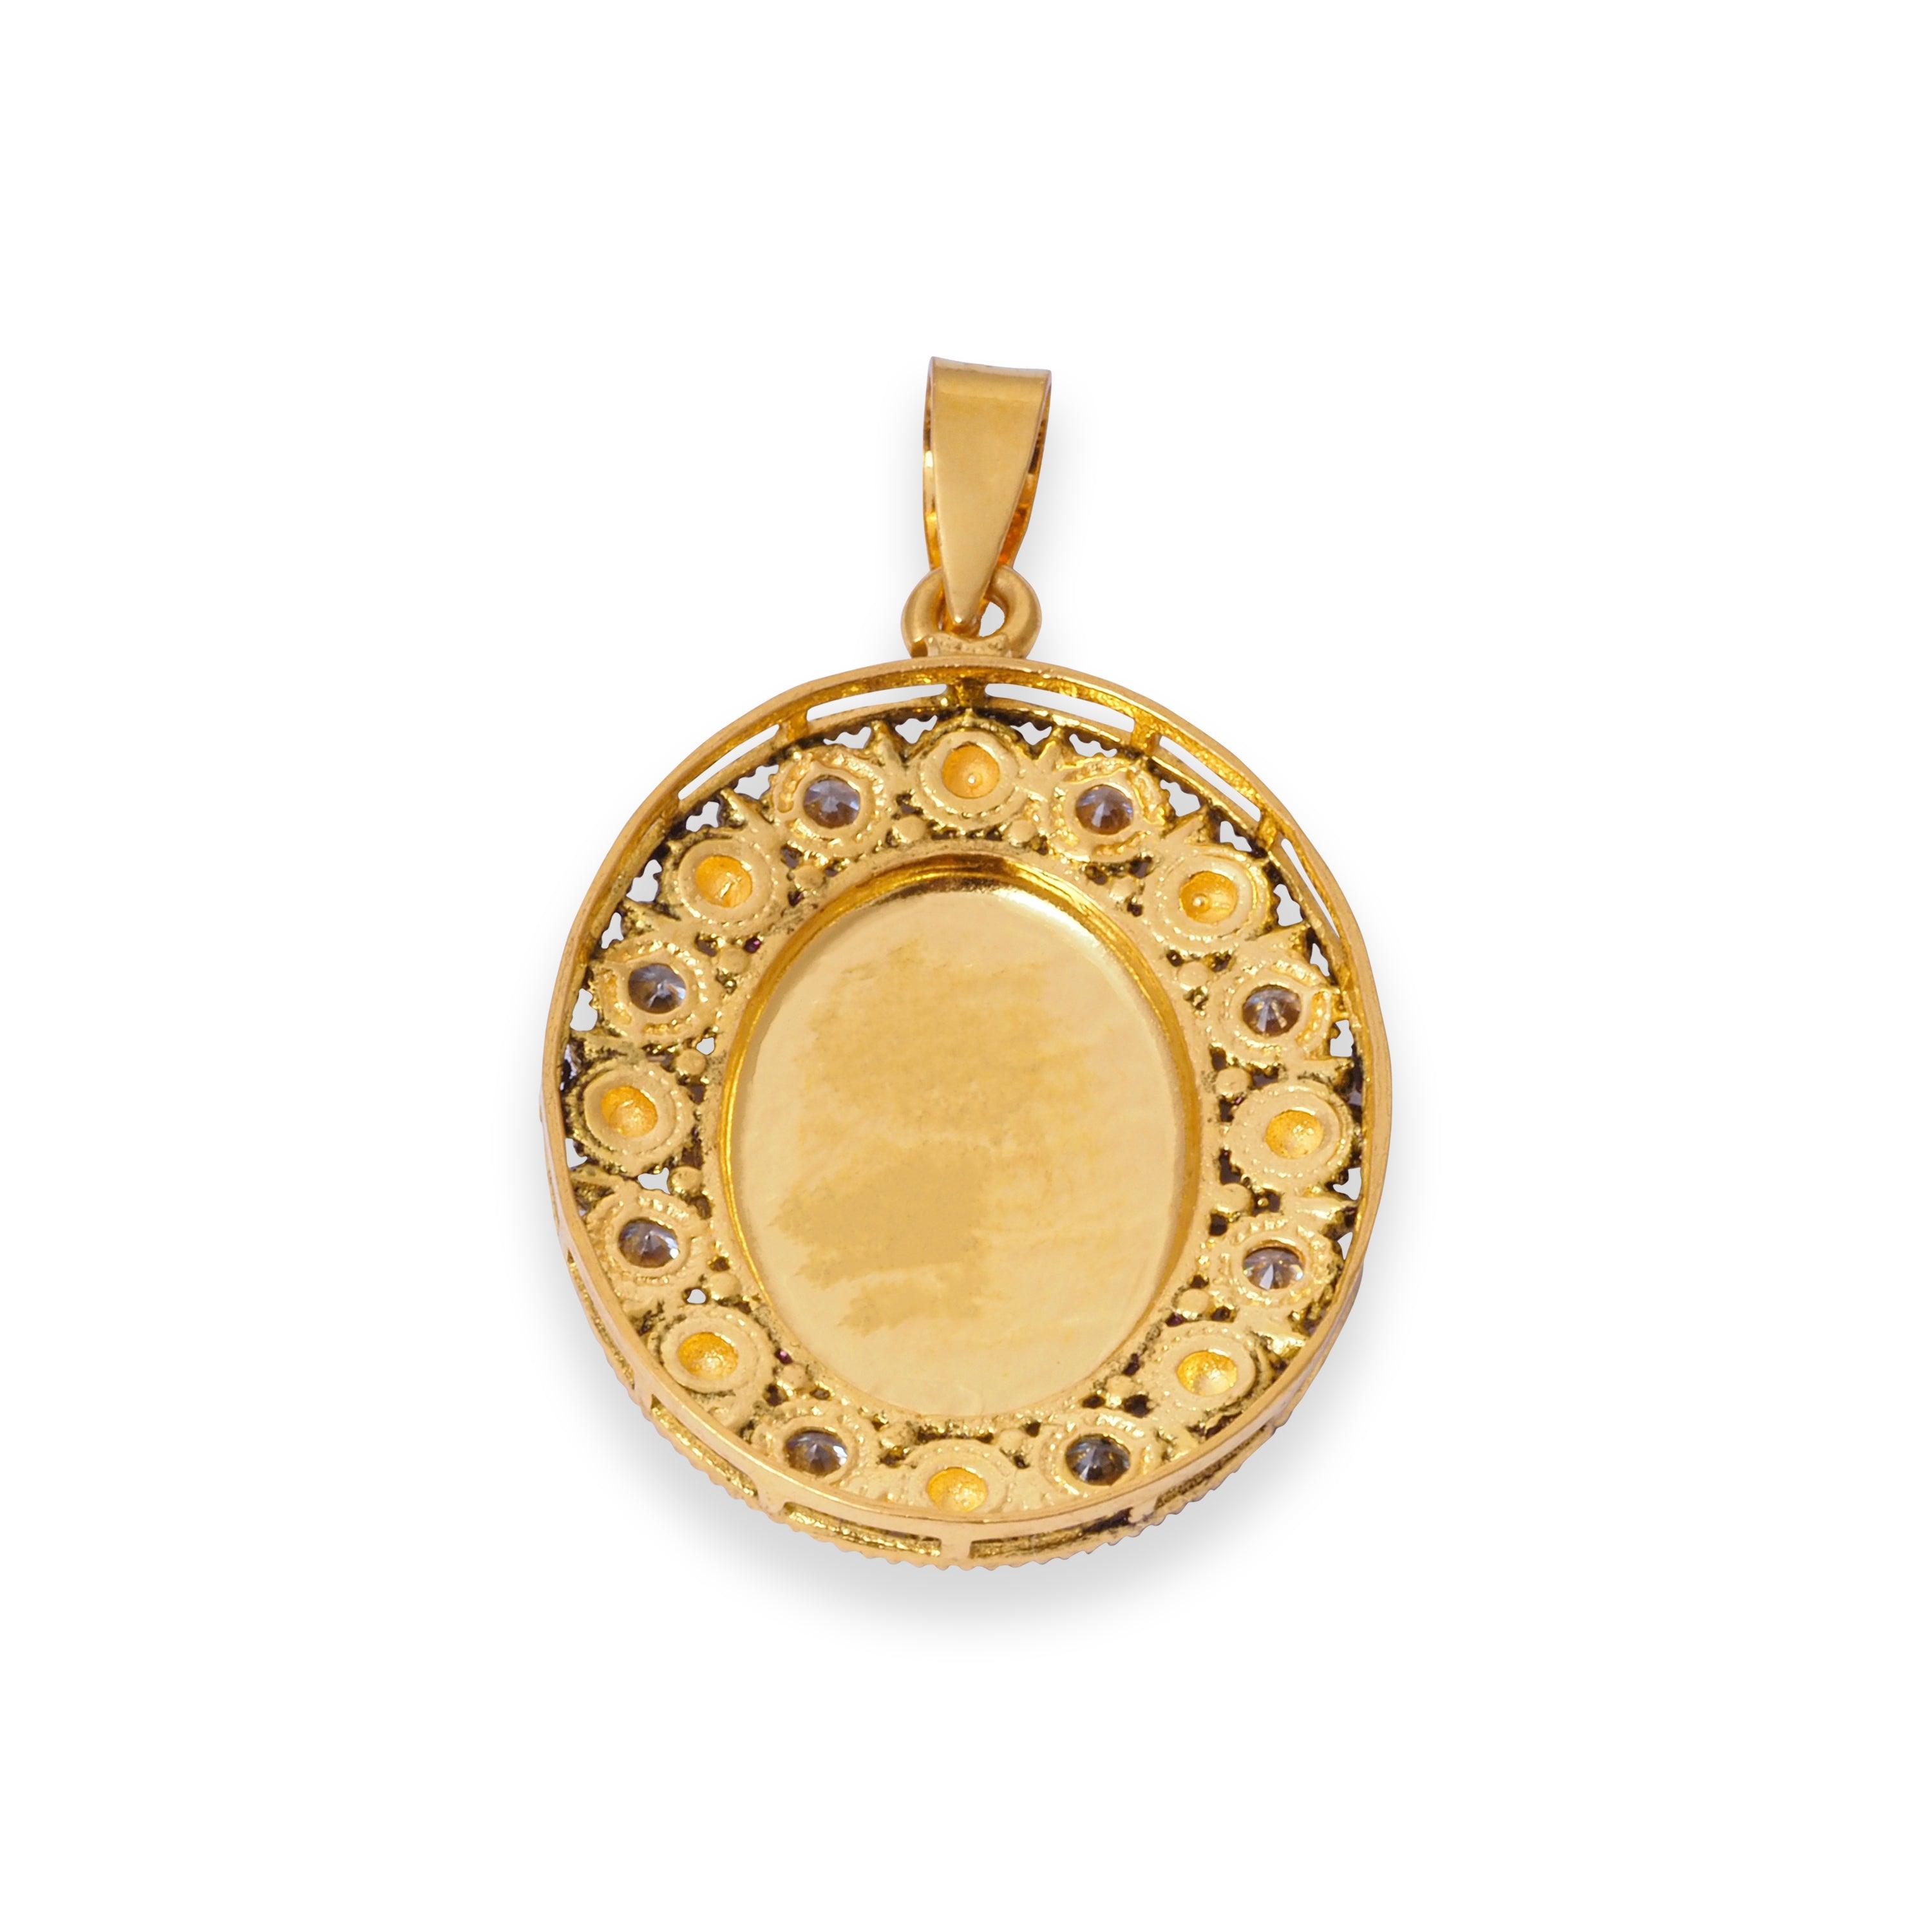 22ct Yellow Gold Islamic Allah Pendant with Antiquated Finish P-7973 - Minar Jewellers